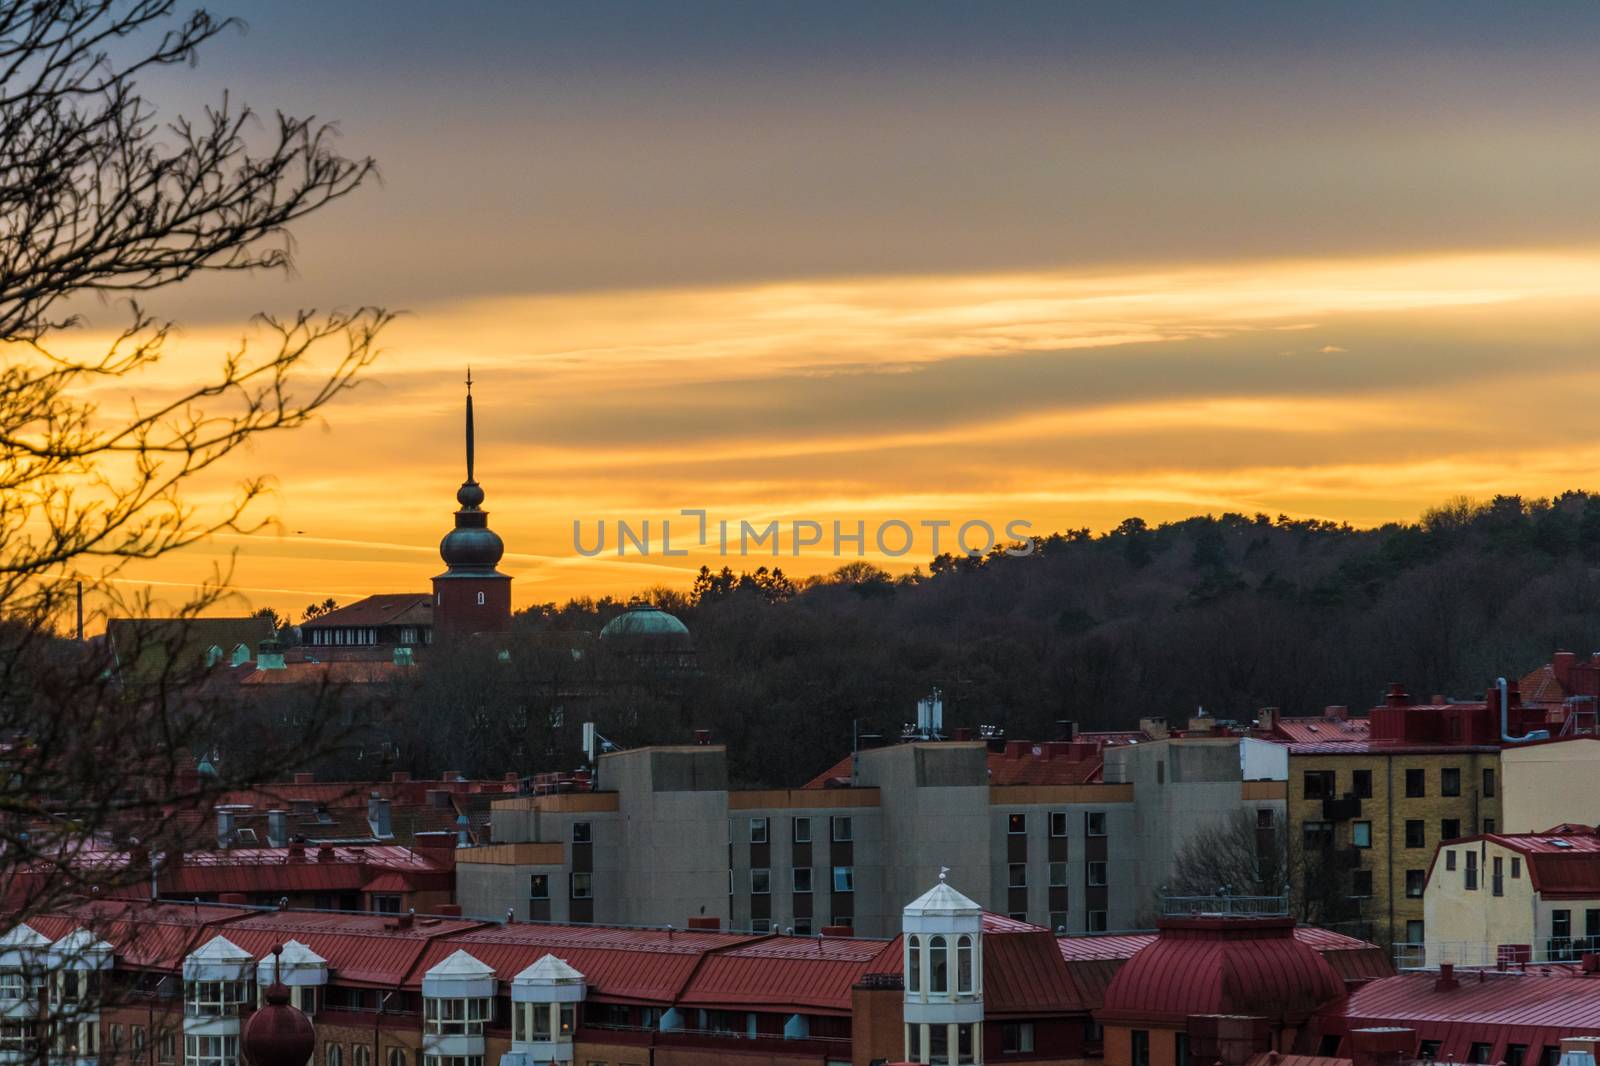 Sunset scene above the roof tops of Gothenburg Sweden by MXW_Stock